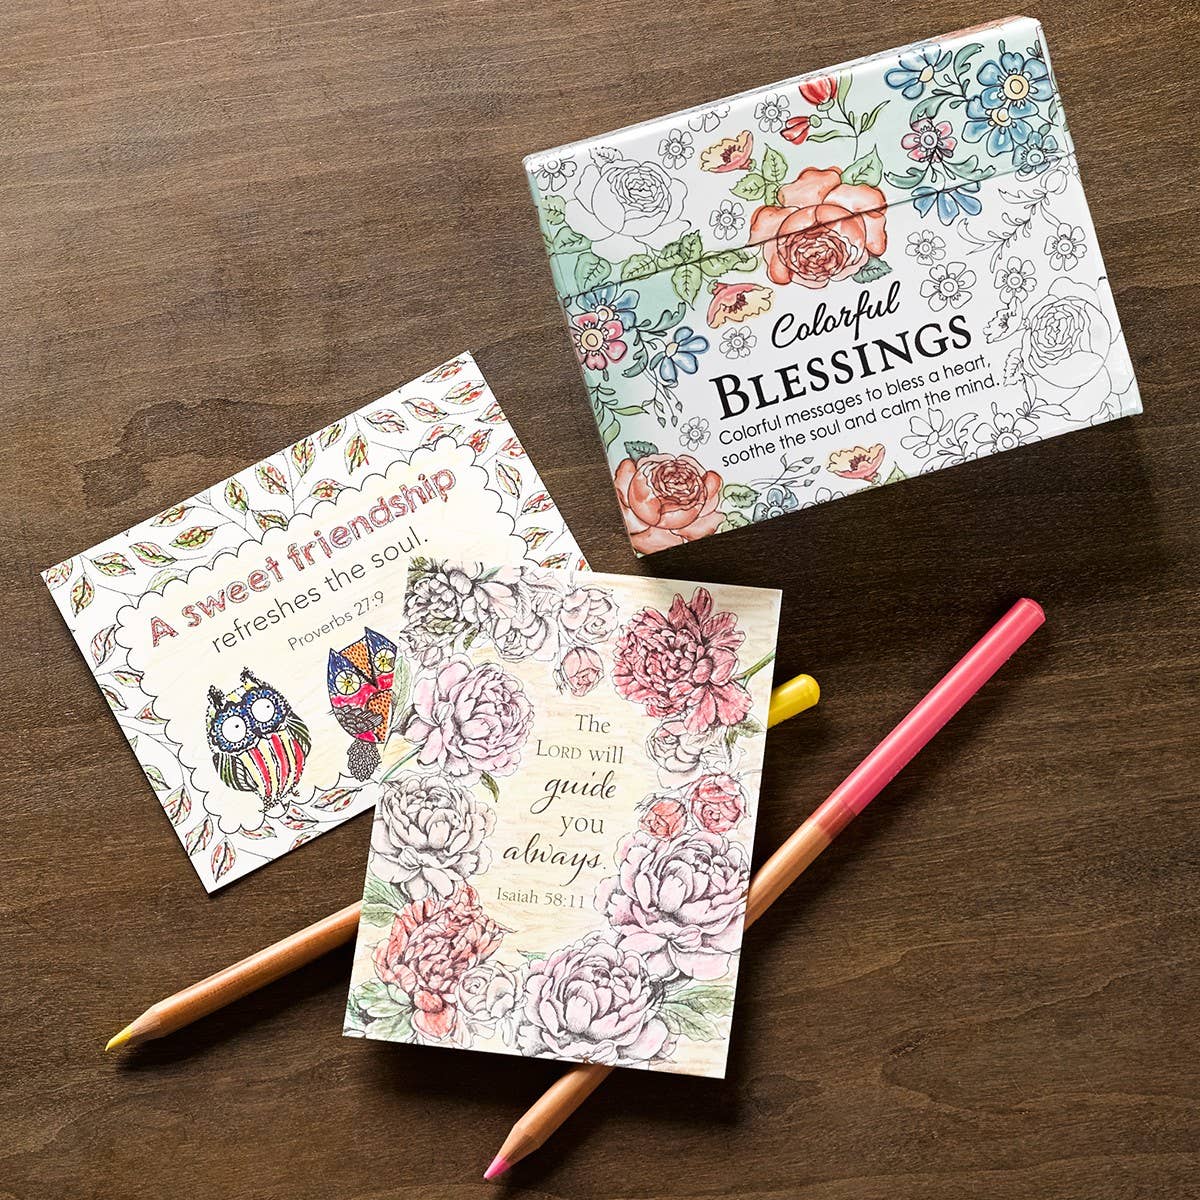 Colorful Blessings Coloring Cards